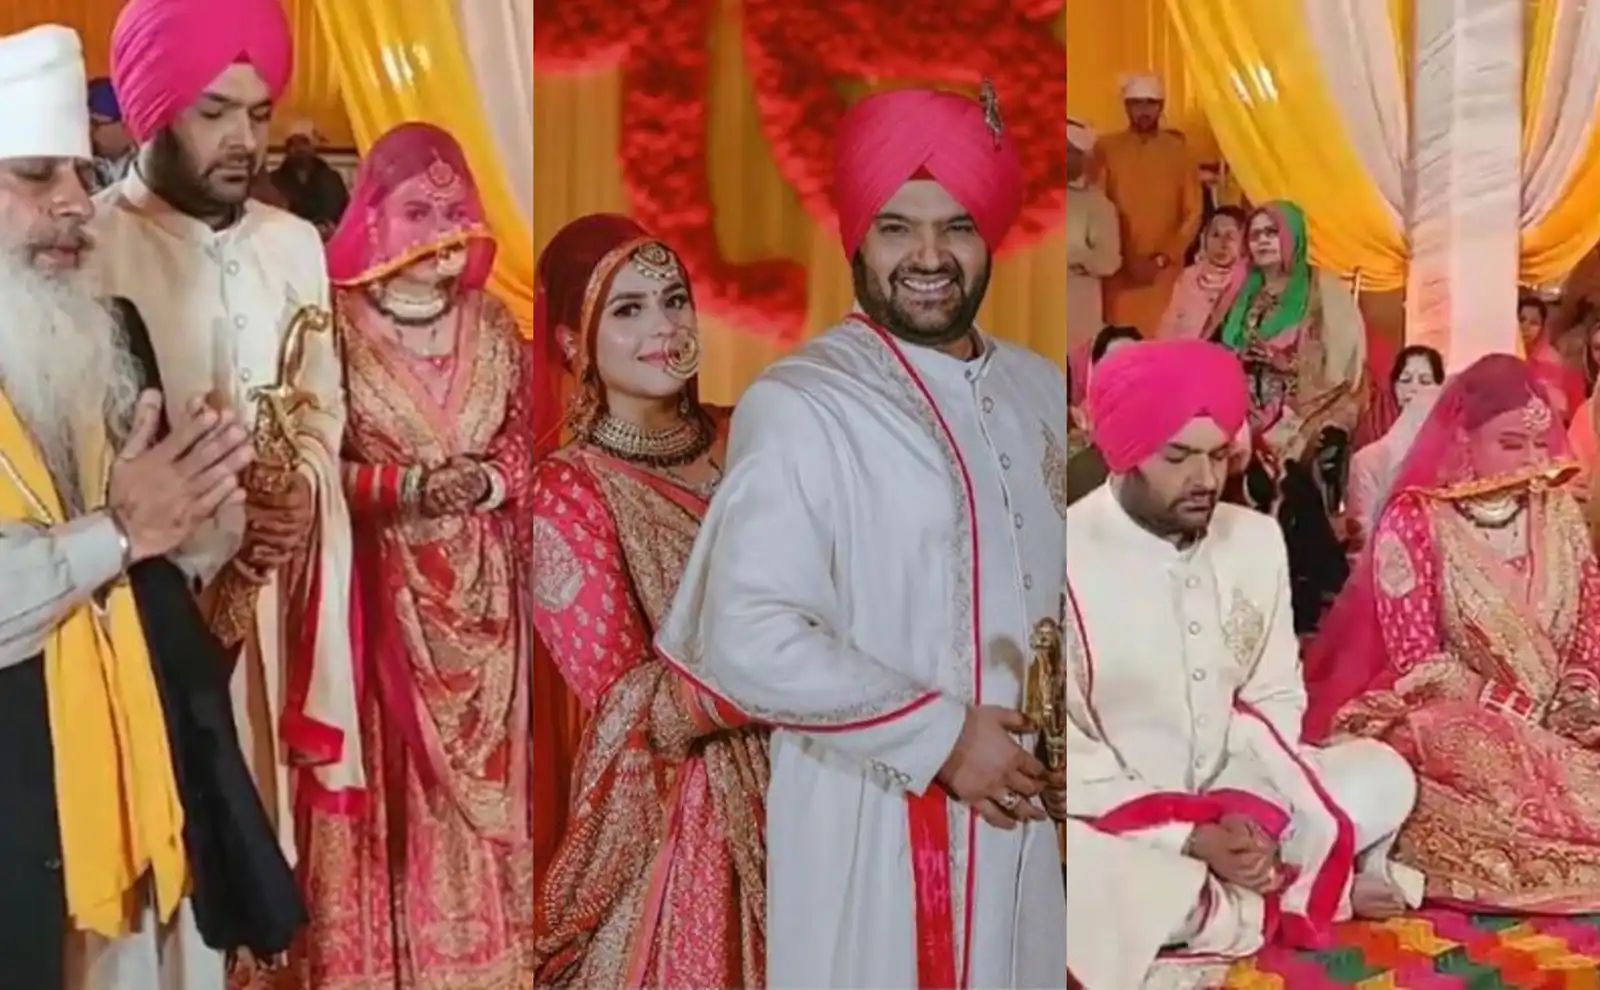 Check Out These Unseen Videos And Pictures From Kapil Sharma's Anand Karaj Ceremony!